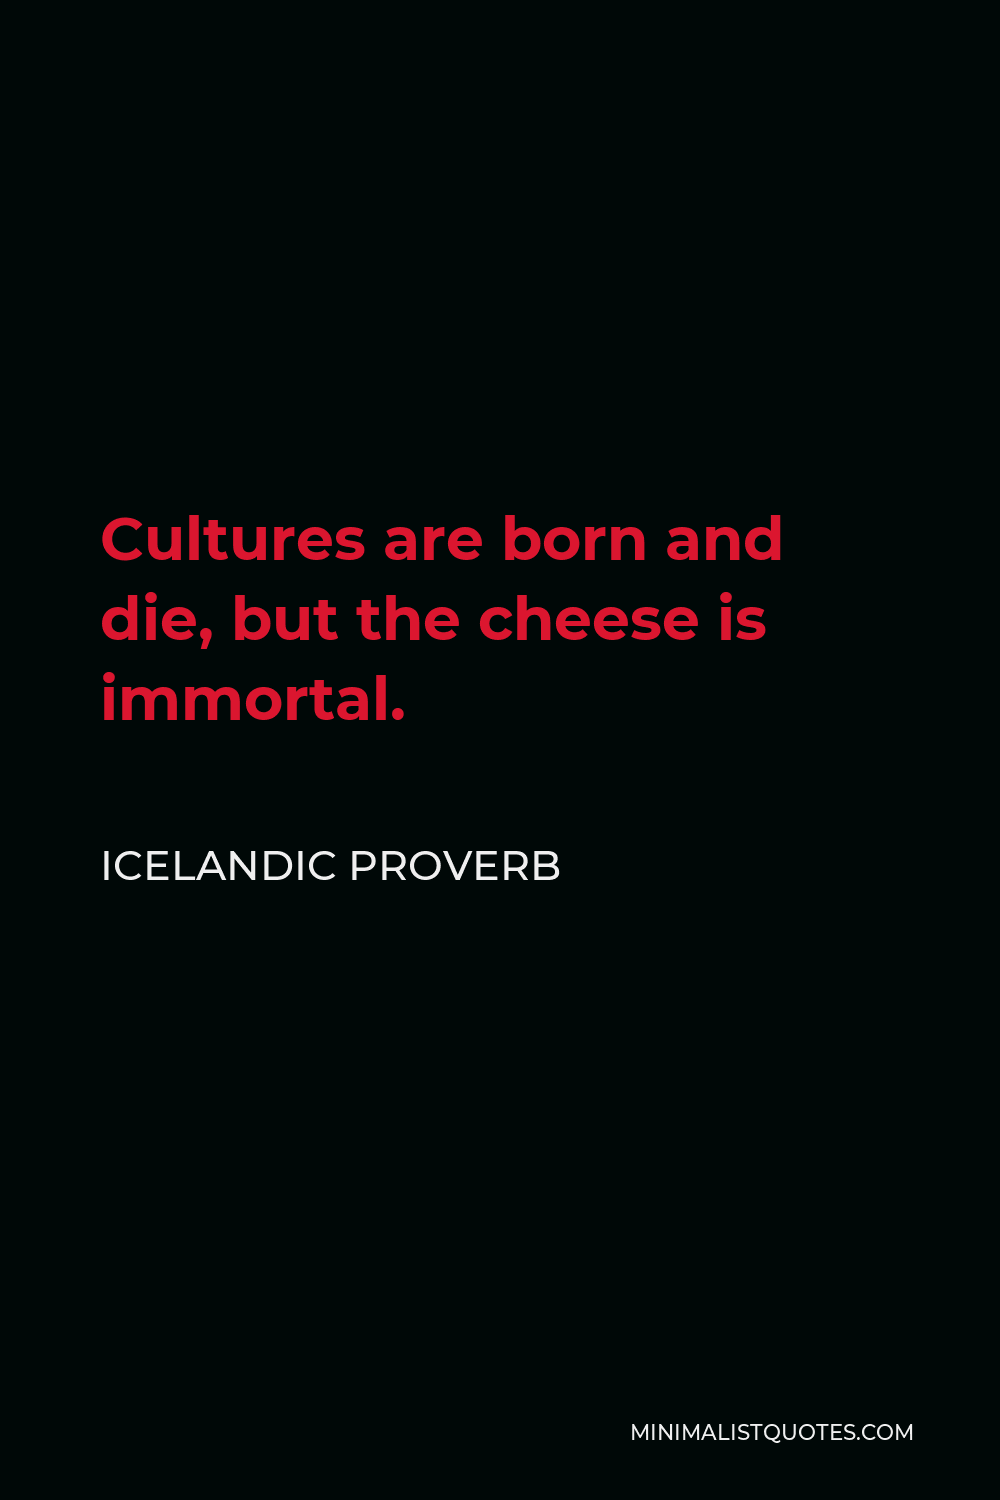 Icelandic Proverb Quote - Cultures are born and die, but the cheese is immortal.